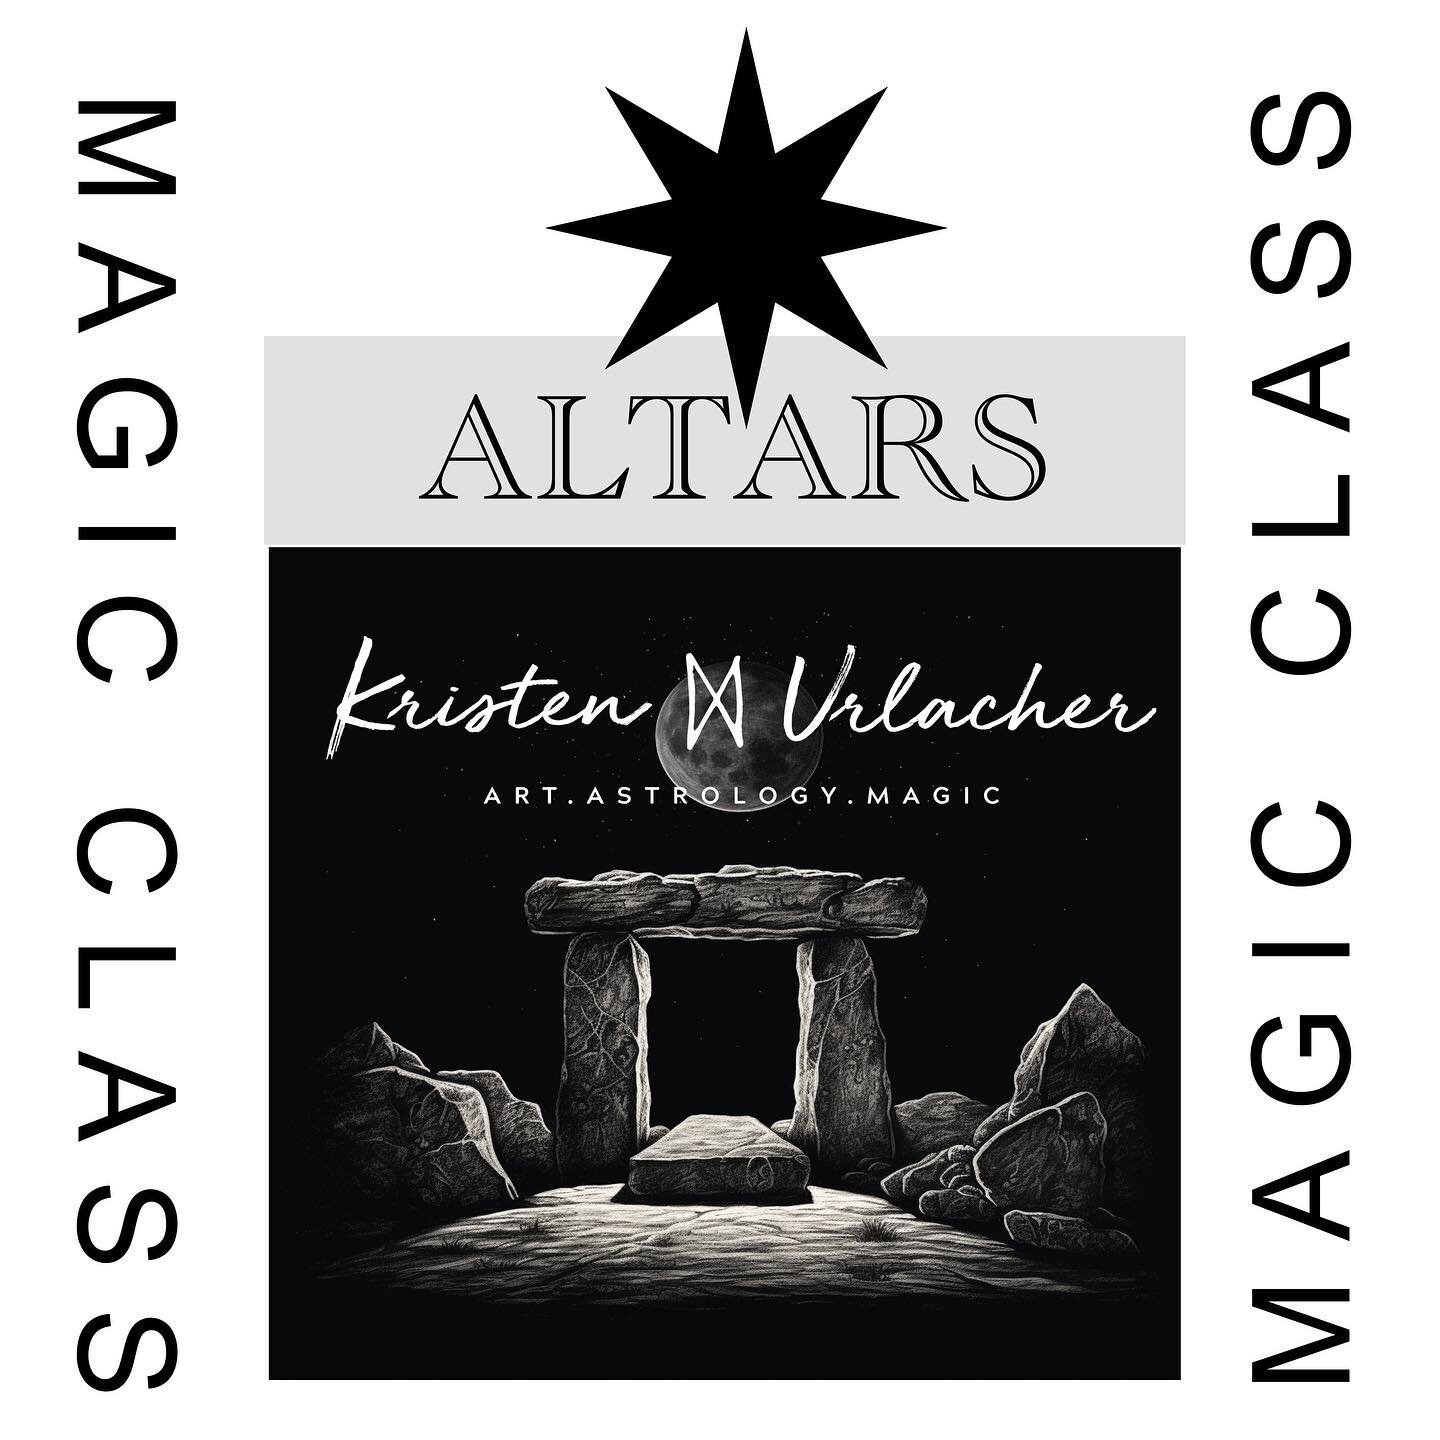 I&rsquo;m giving a lecture and presentation on the subject of ✨Altars✨
 if you would like to join. 
Information and registration is in my story, check it out!

Magic Class is free and excellent content is shared. 

I look forward to having you!